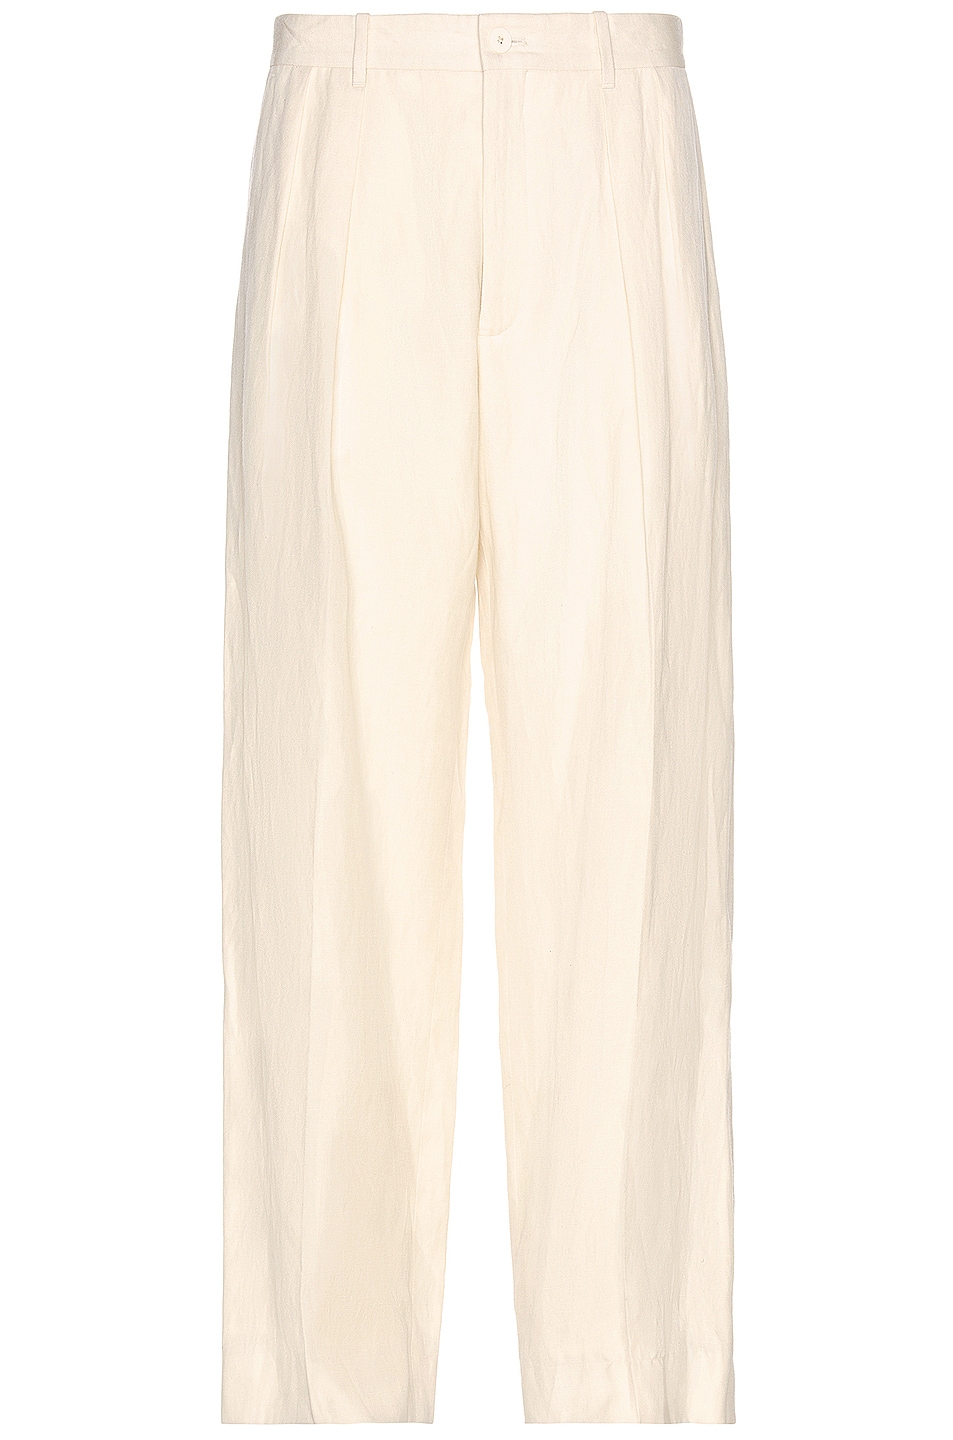 Image 1 of The Row Carl Pant in Ivory